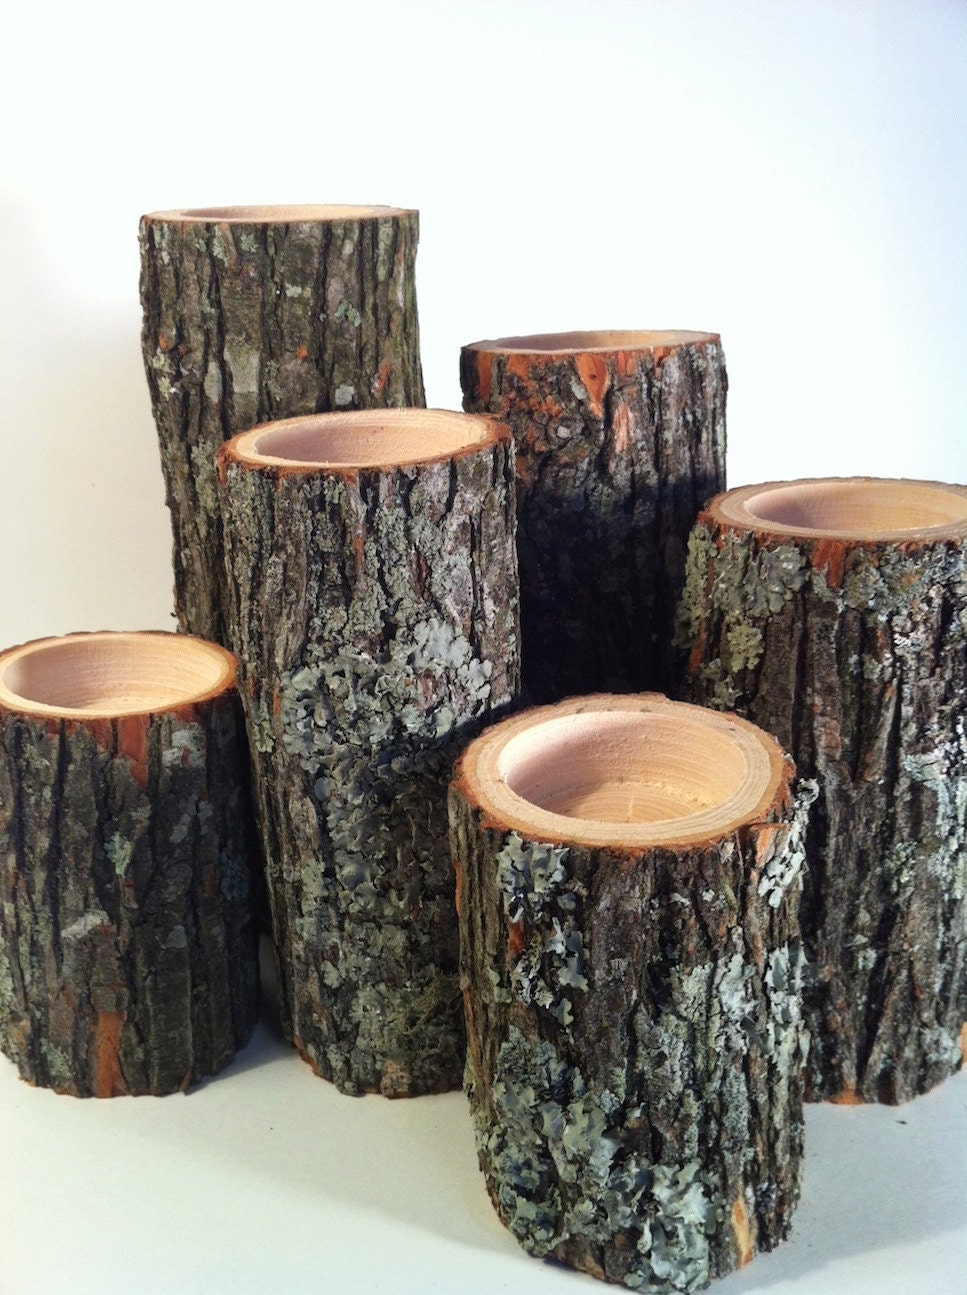 Tree Branch Candle Holders Rustic Cande Sticks Log Candles Repurposed Wood